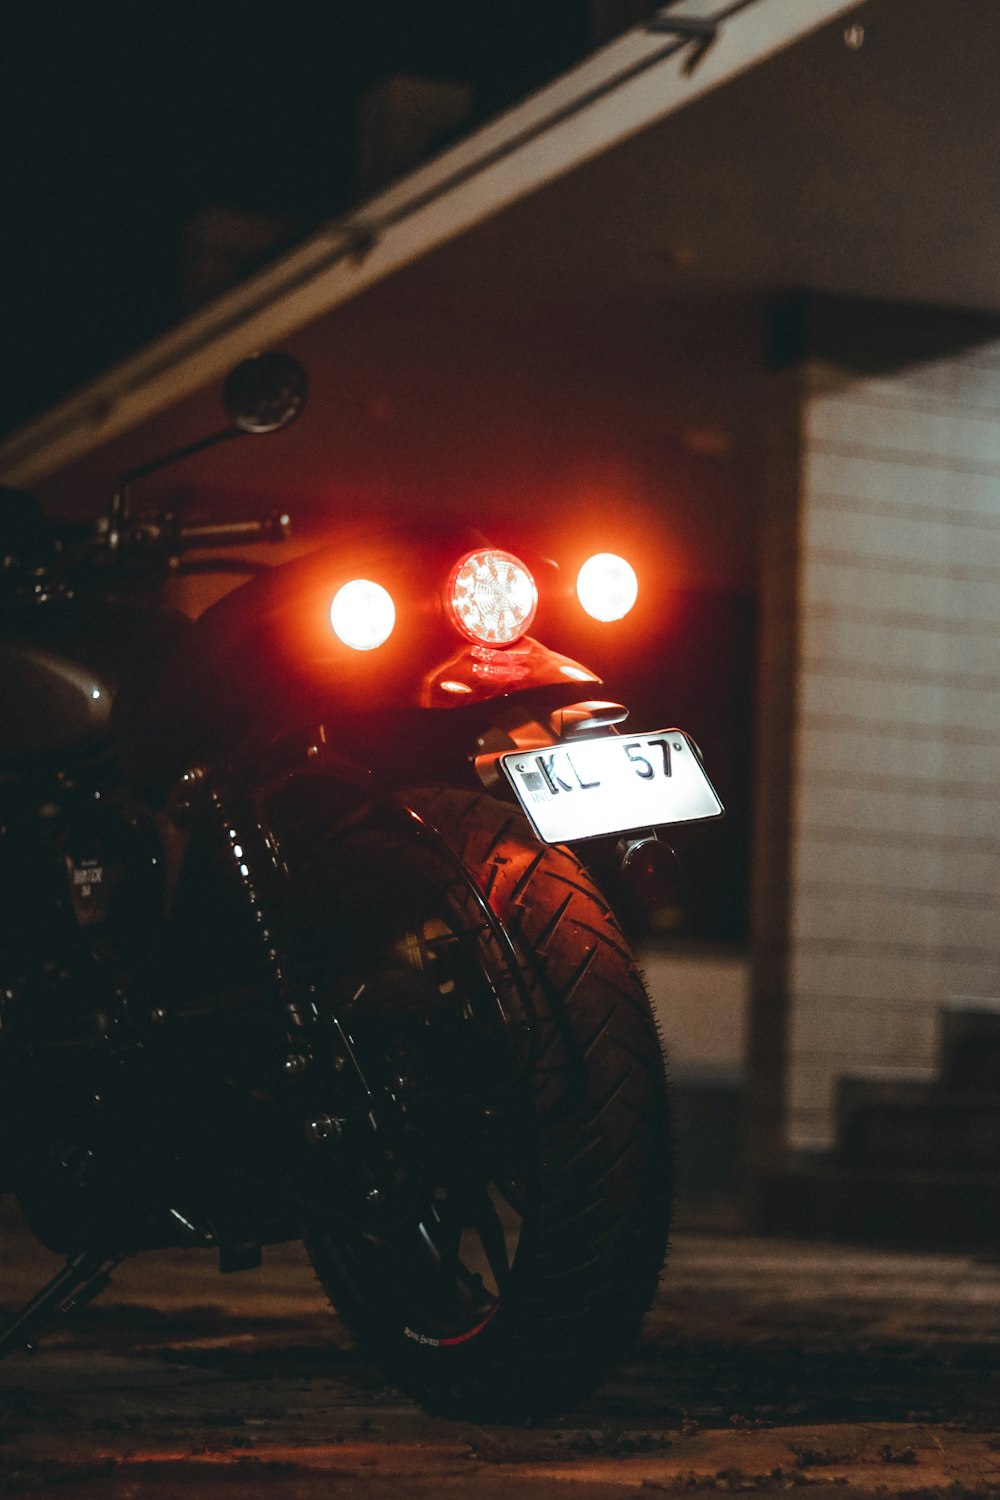 a motorcycle parked in front of a building at night